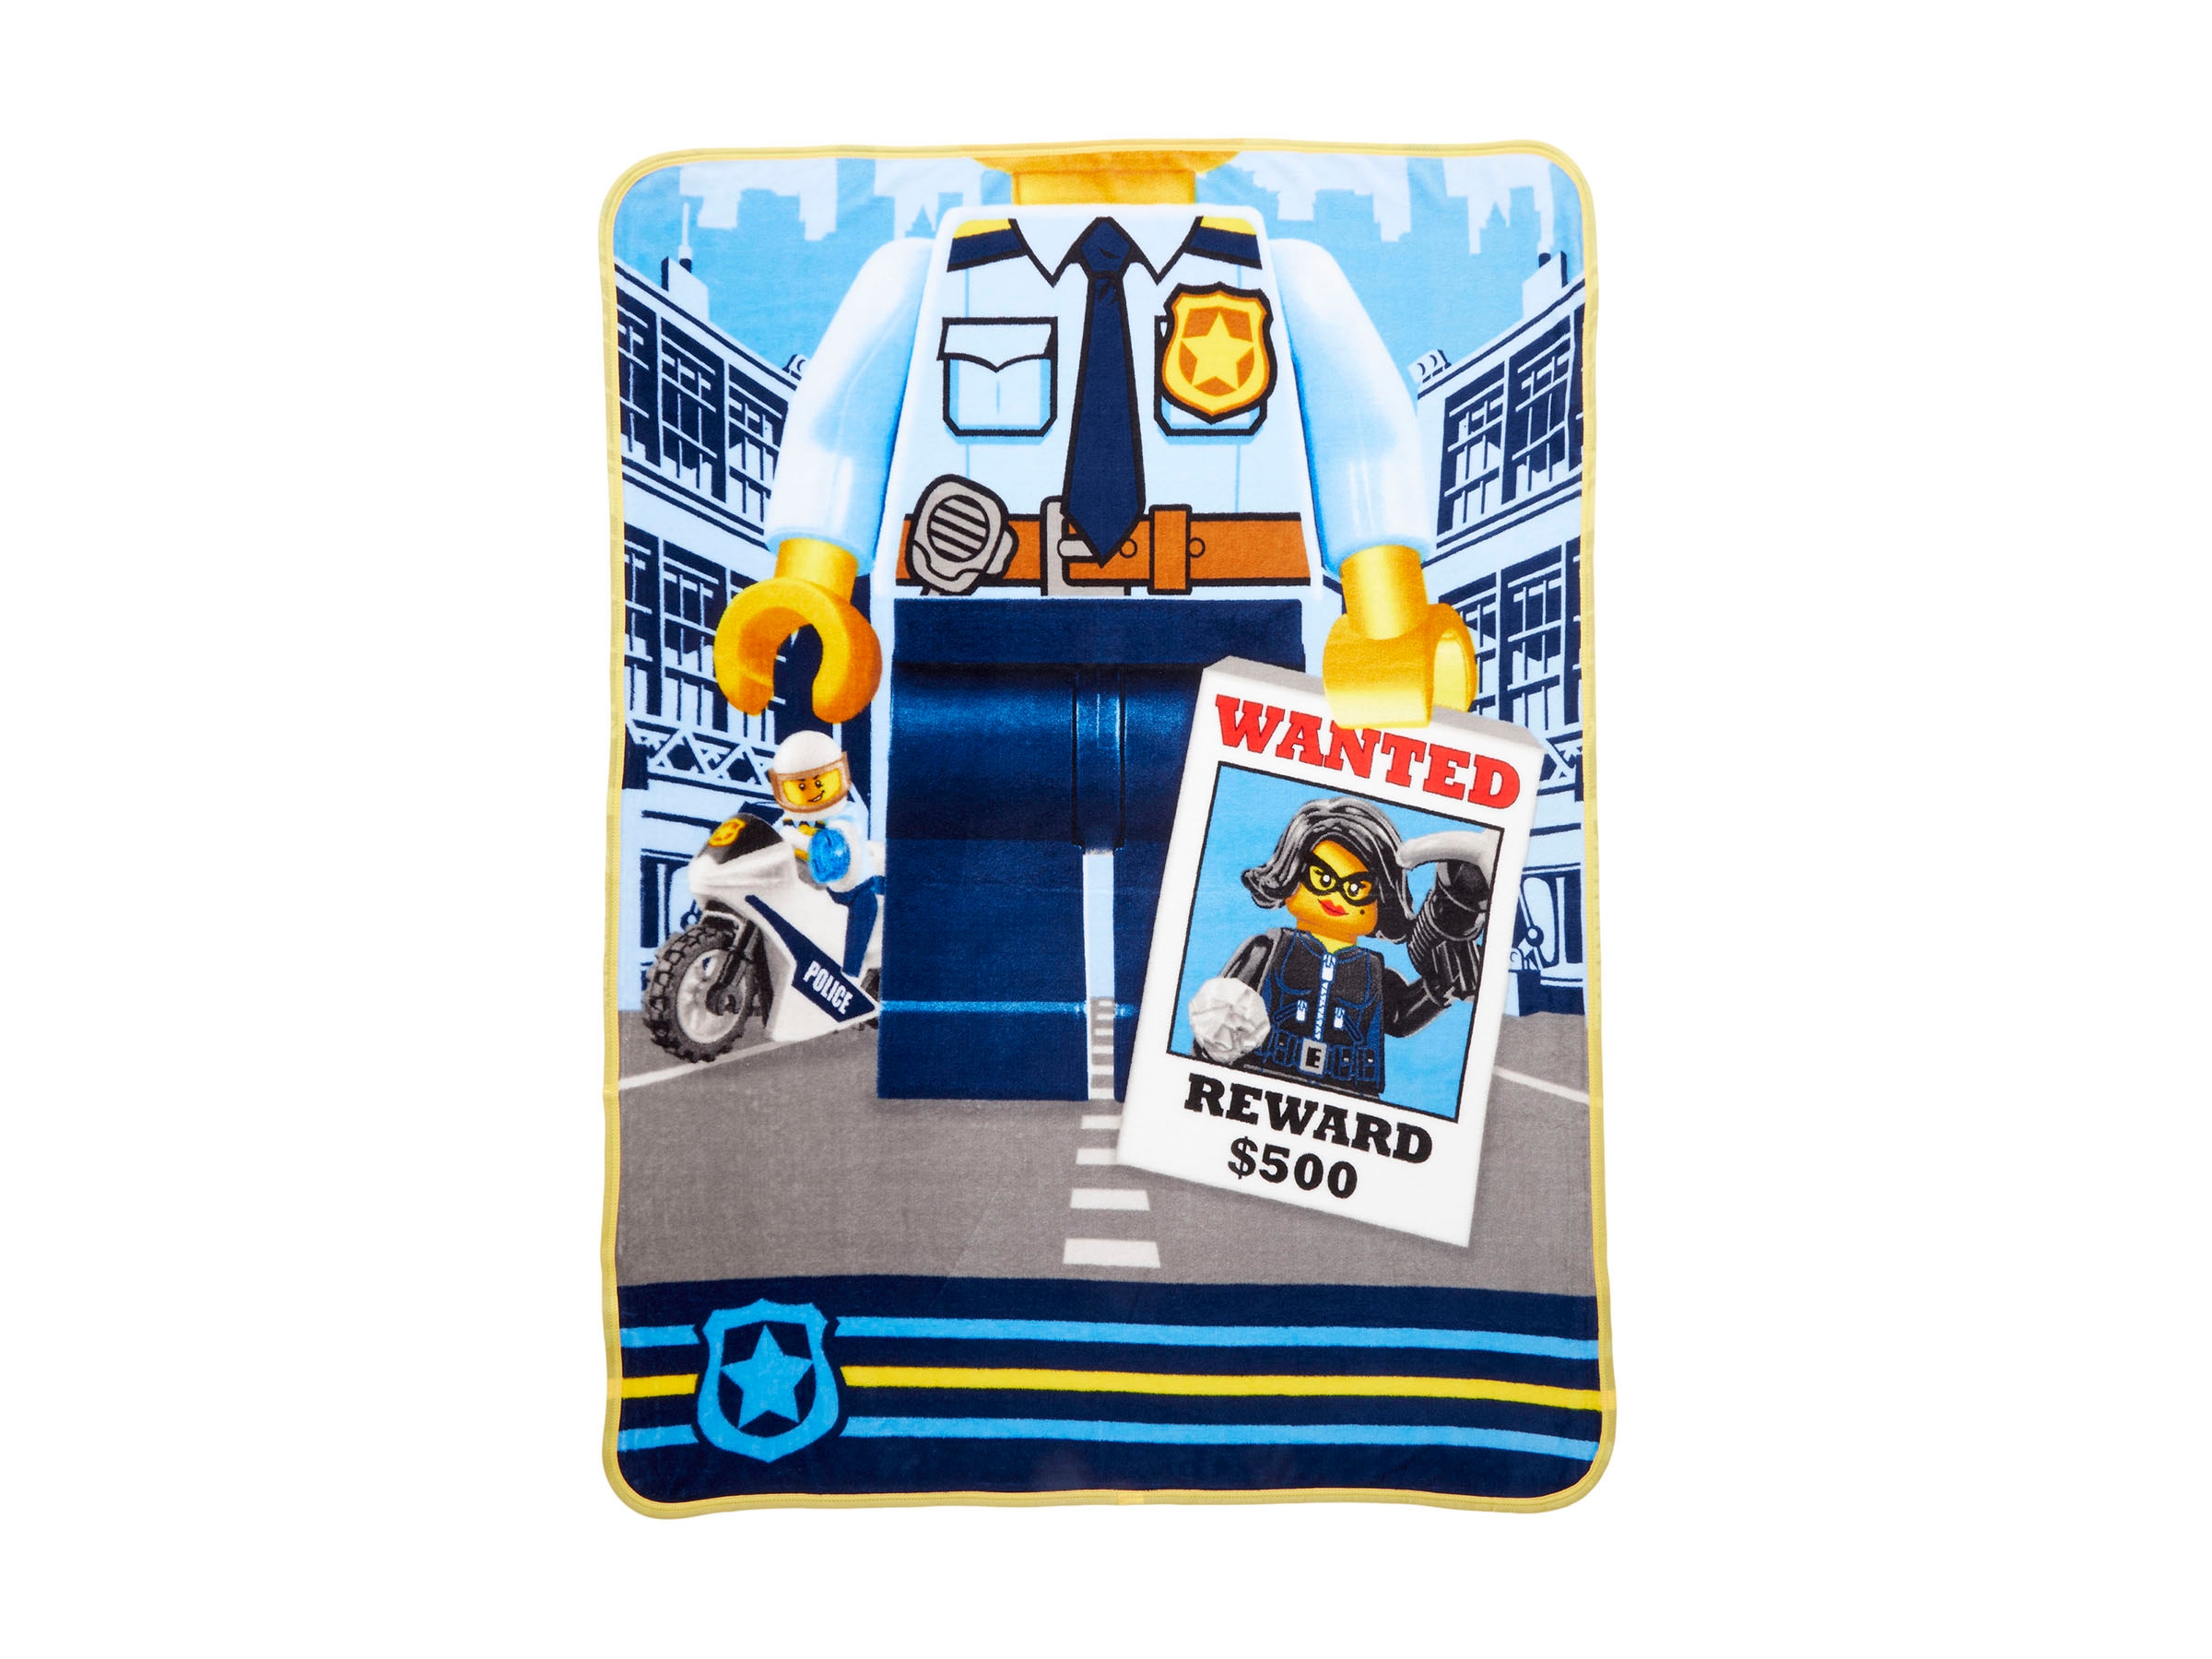 vervoer sirene mild LEGO® City Police 46 in. x 60 in. Throw 5007183 | City | Buy online at the  Official LEGO® Shop US